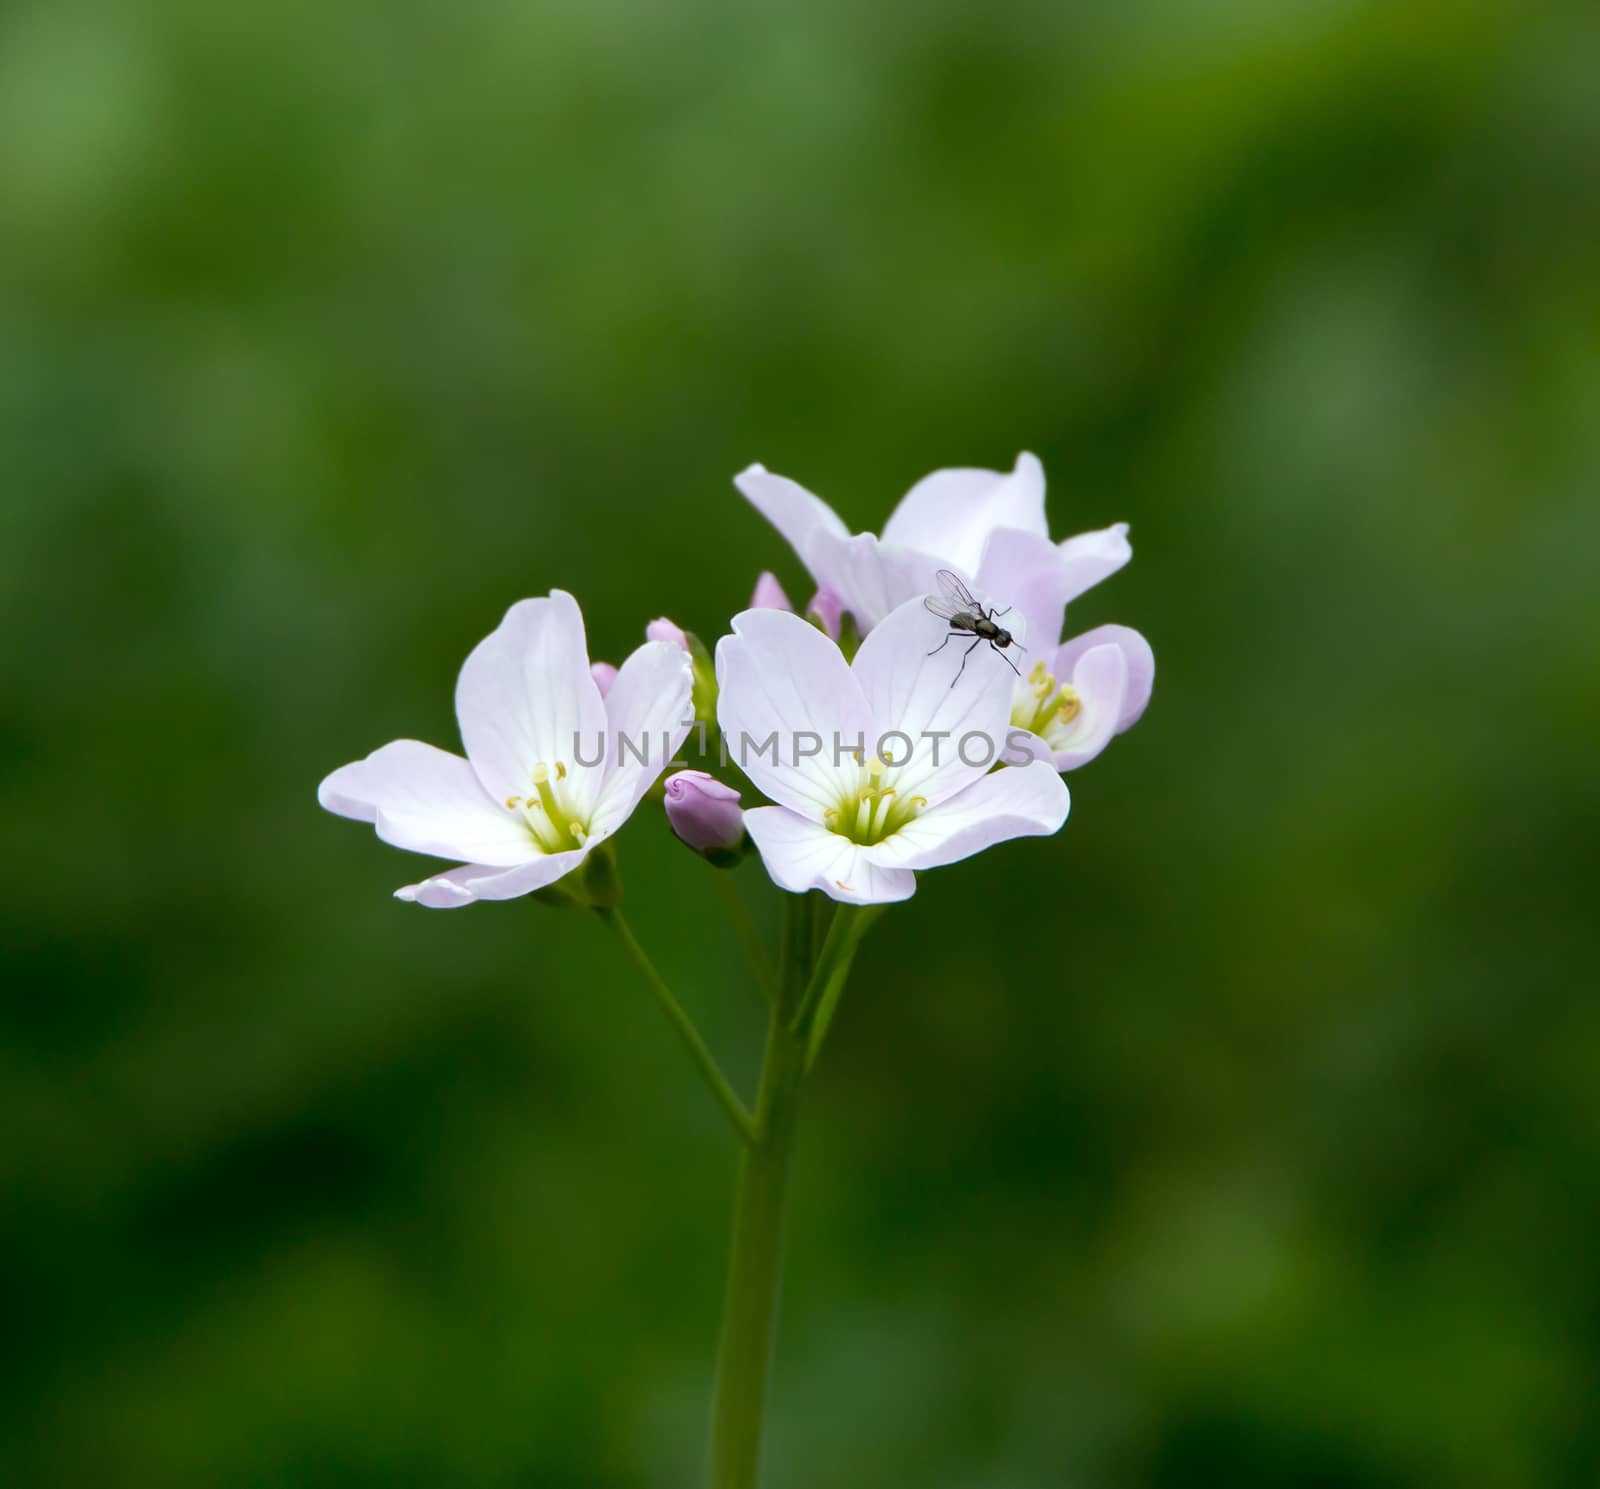 Wild flower Lady's Smock or Cuckoo Flower, with insect.